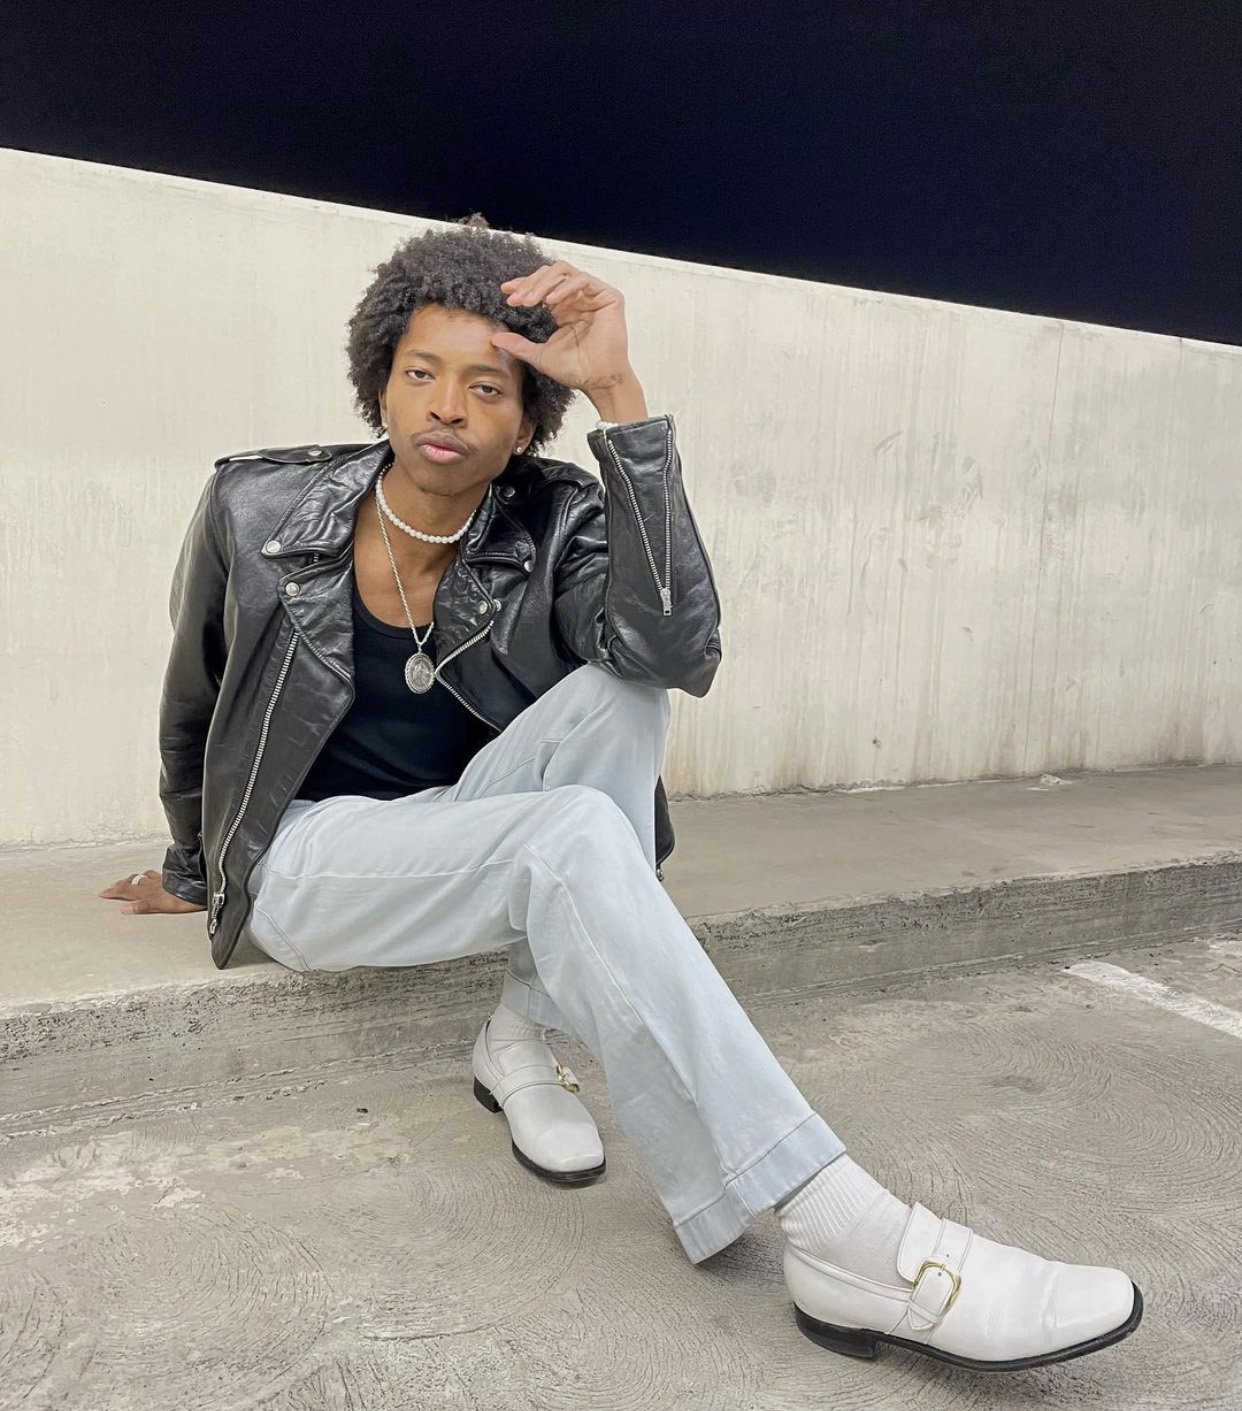 Katriel sitting on a cement curb wearing a black leather motorcycle jacket, black t-shirt, light wash denim and white loafers with socks